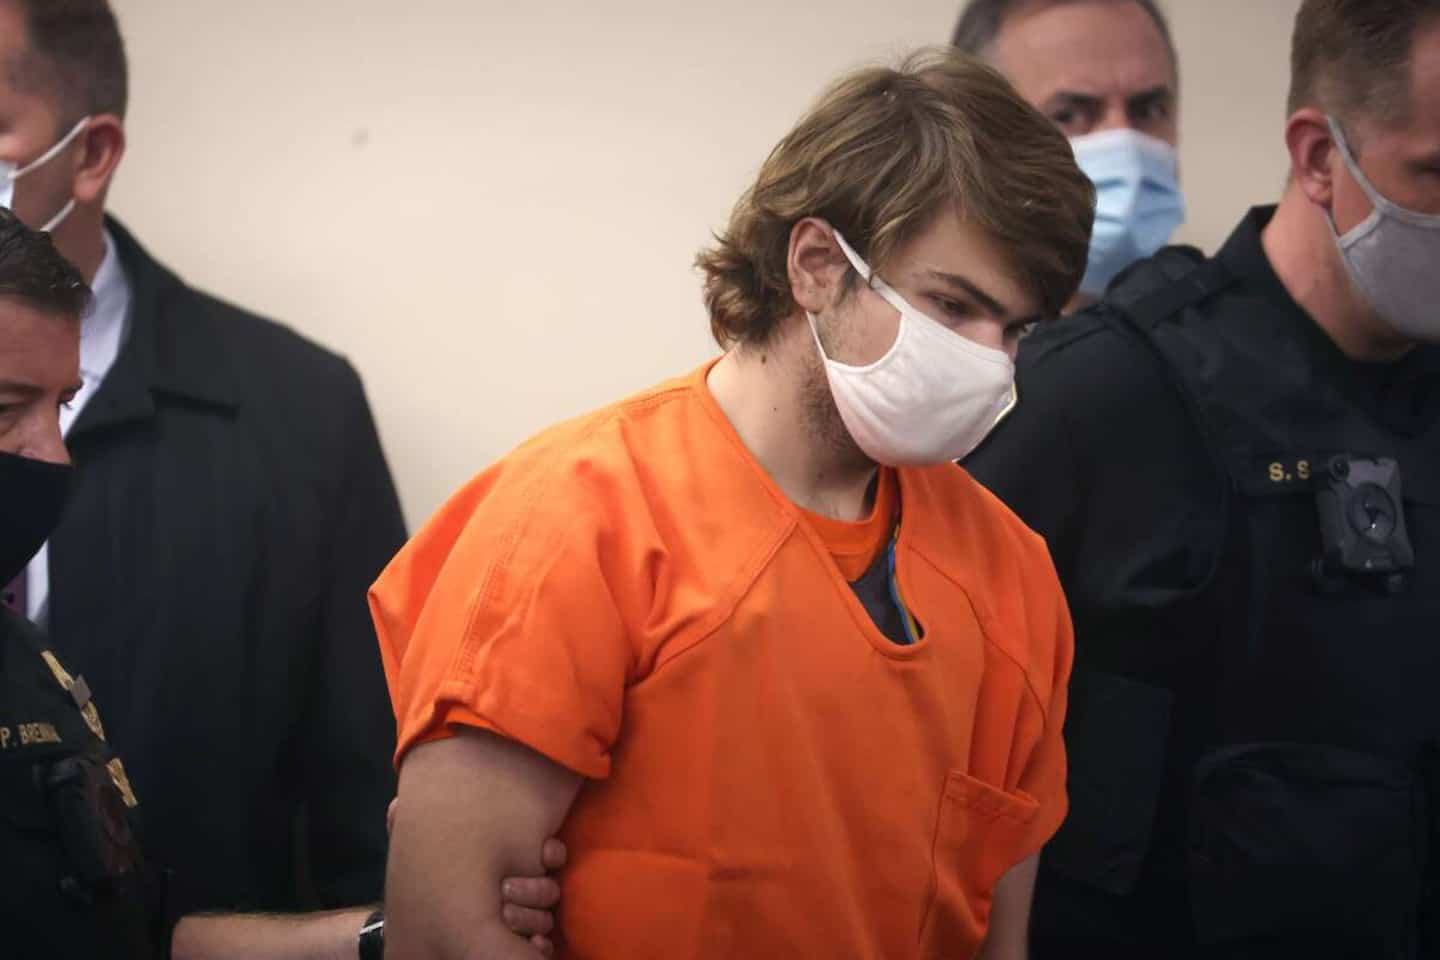 Racist Buffalo killings: Young white supremacist charged with 'domestic terrorism'